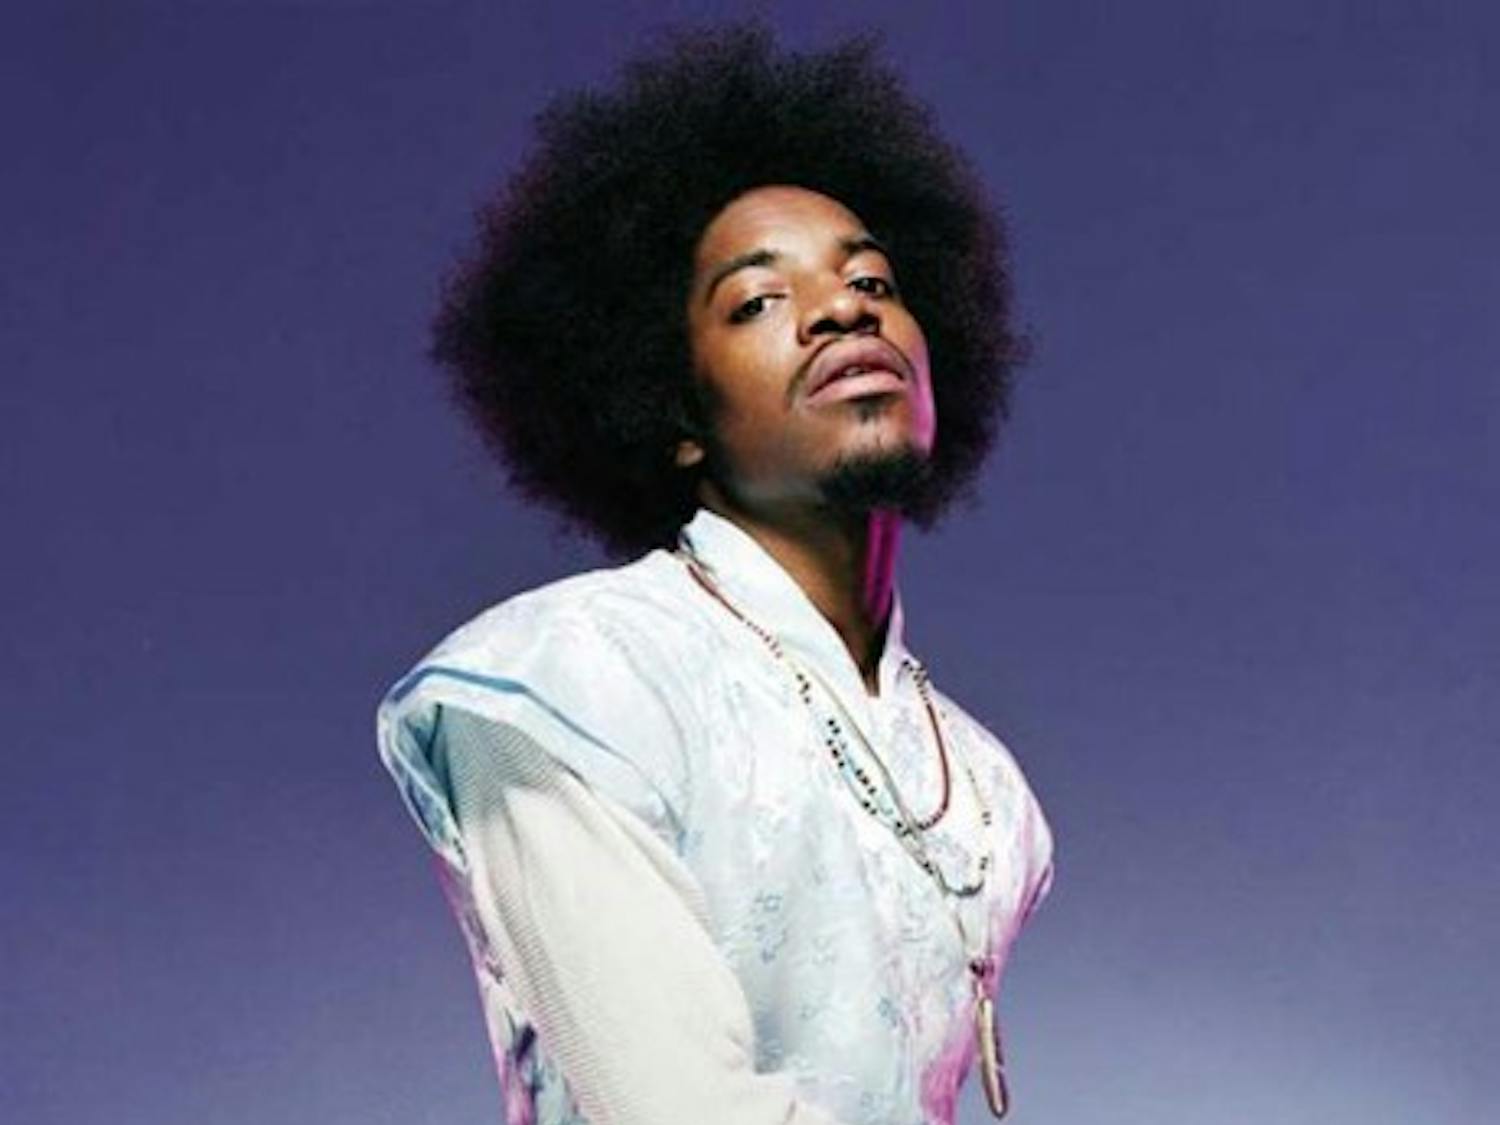 UNDERGROUND KING: Andre 3000, half of the popular group OutKast, is one of the most recognizable names in the underground hip-hop scene.  While OutKast has gained mainstream success, Andre 3000 is still widely respected among many underground hip-hop acts. (Courtesy of OutKast)